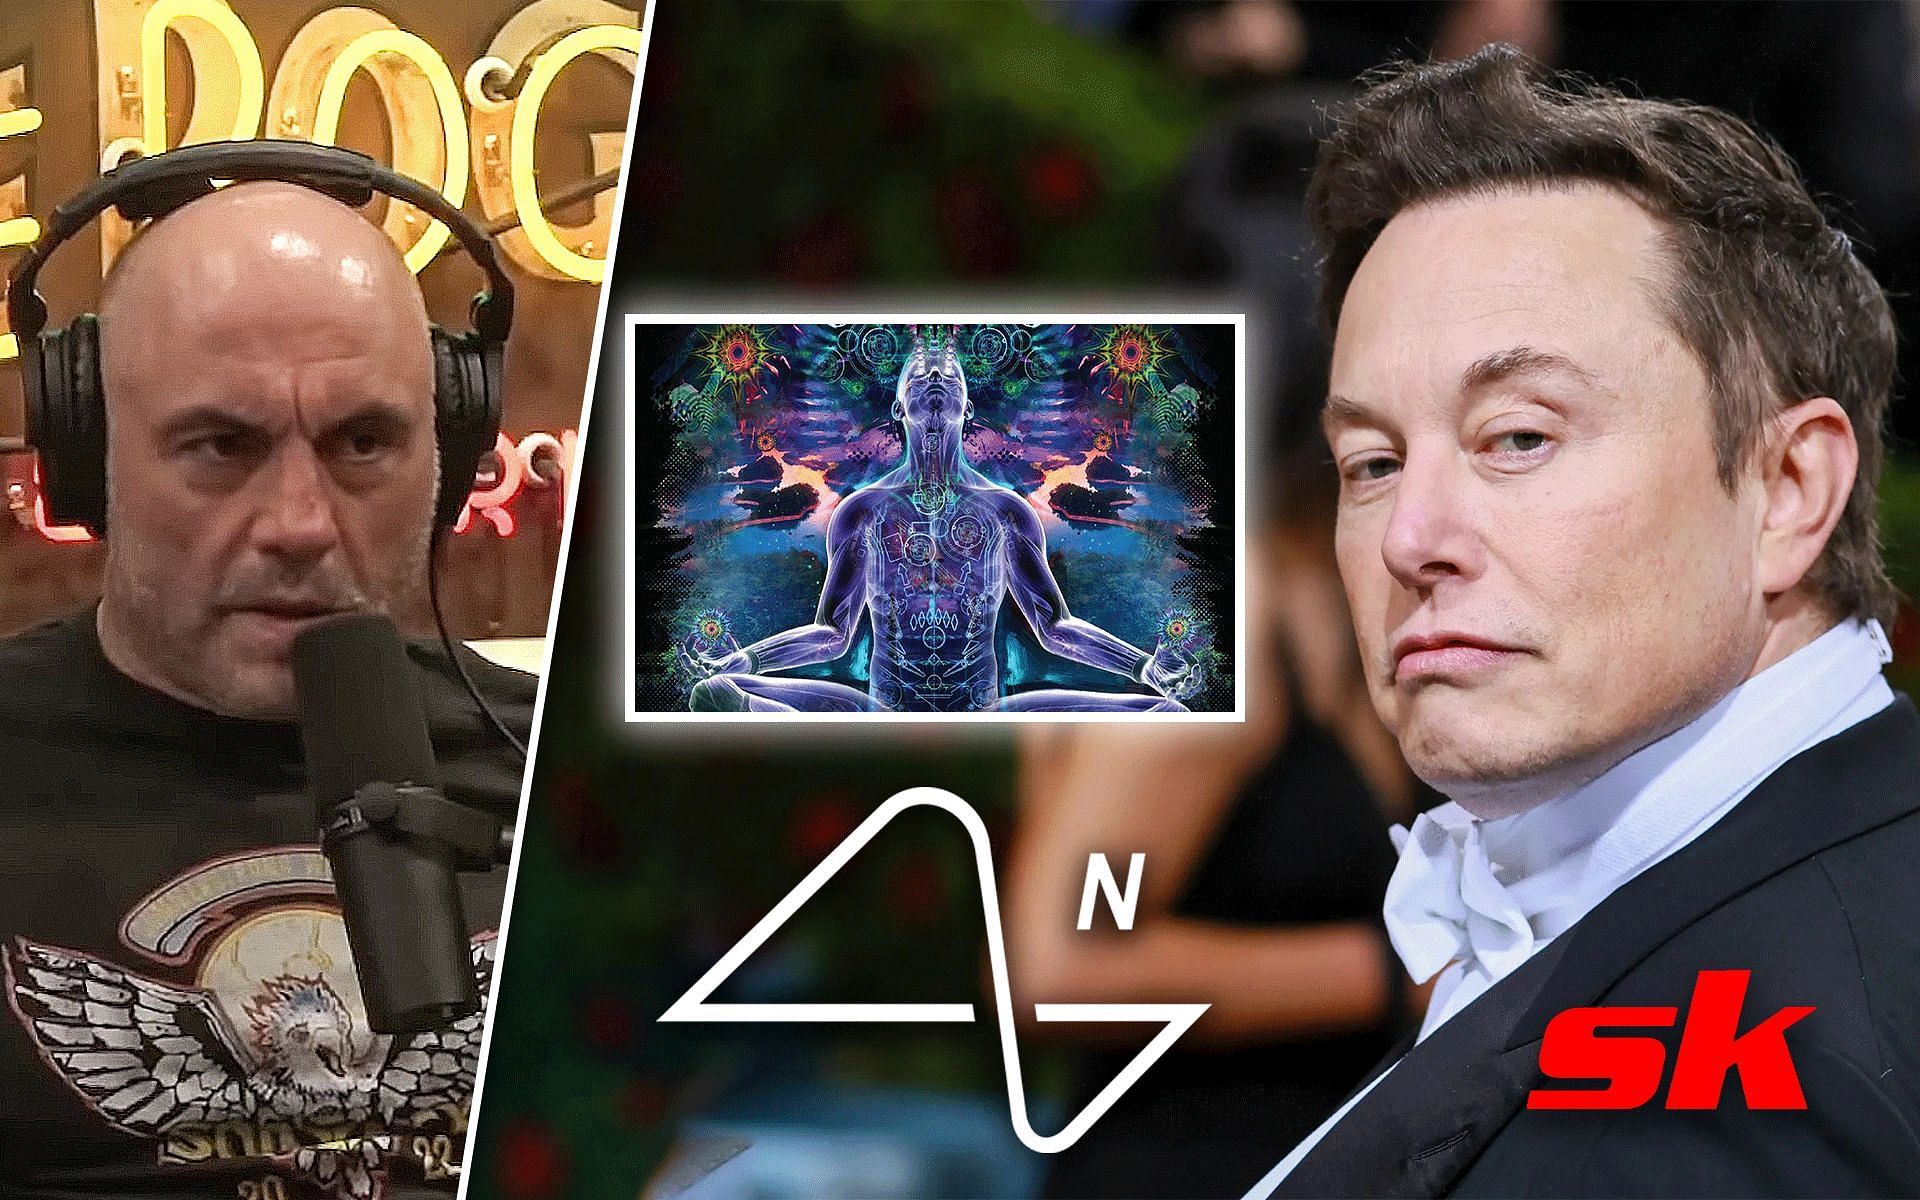 Joe Rogan (left), Elon Musk (right) [Images courtesy of Power JRE on YouTube, wired.com, neuralink.com, and realitysandwich.com]